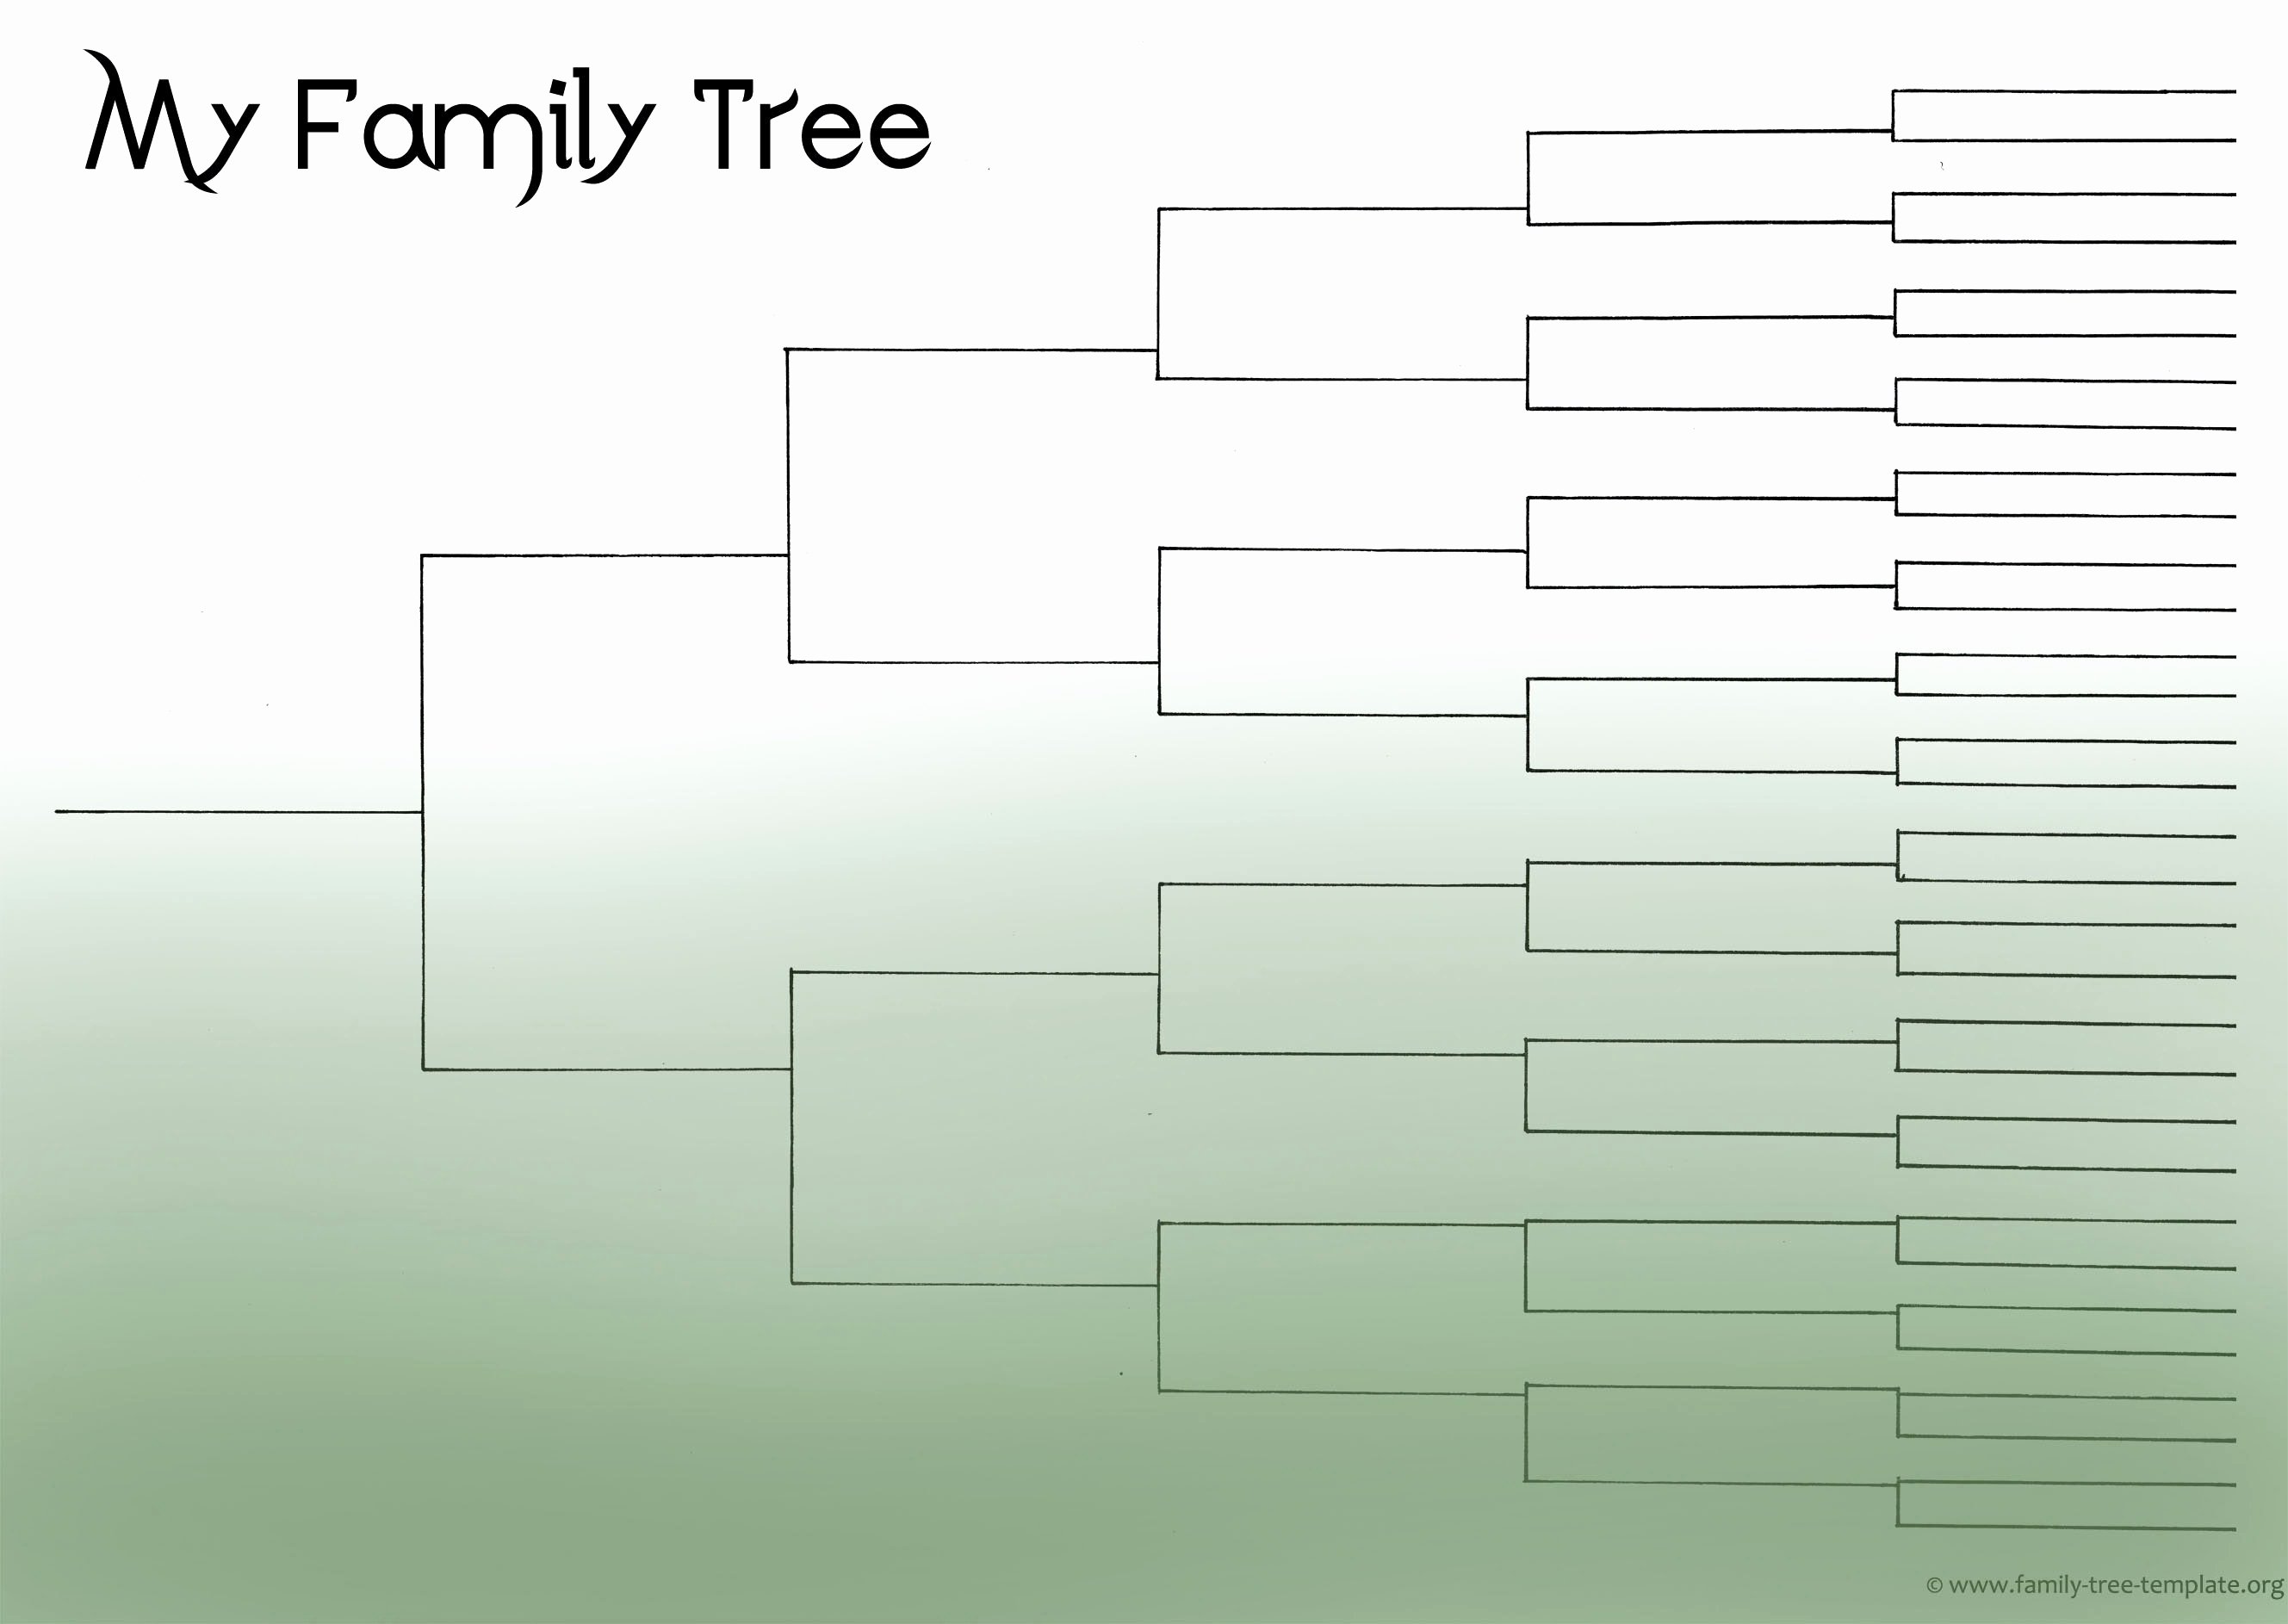 Family Tree Template Google Docs Best Of Family Tree Template Google Docs